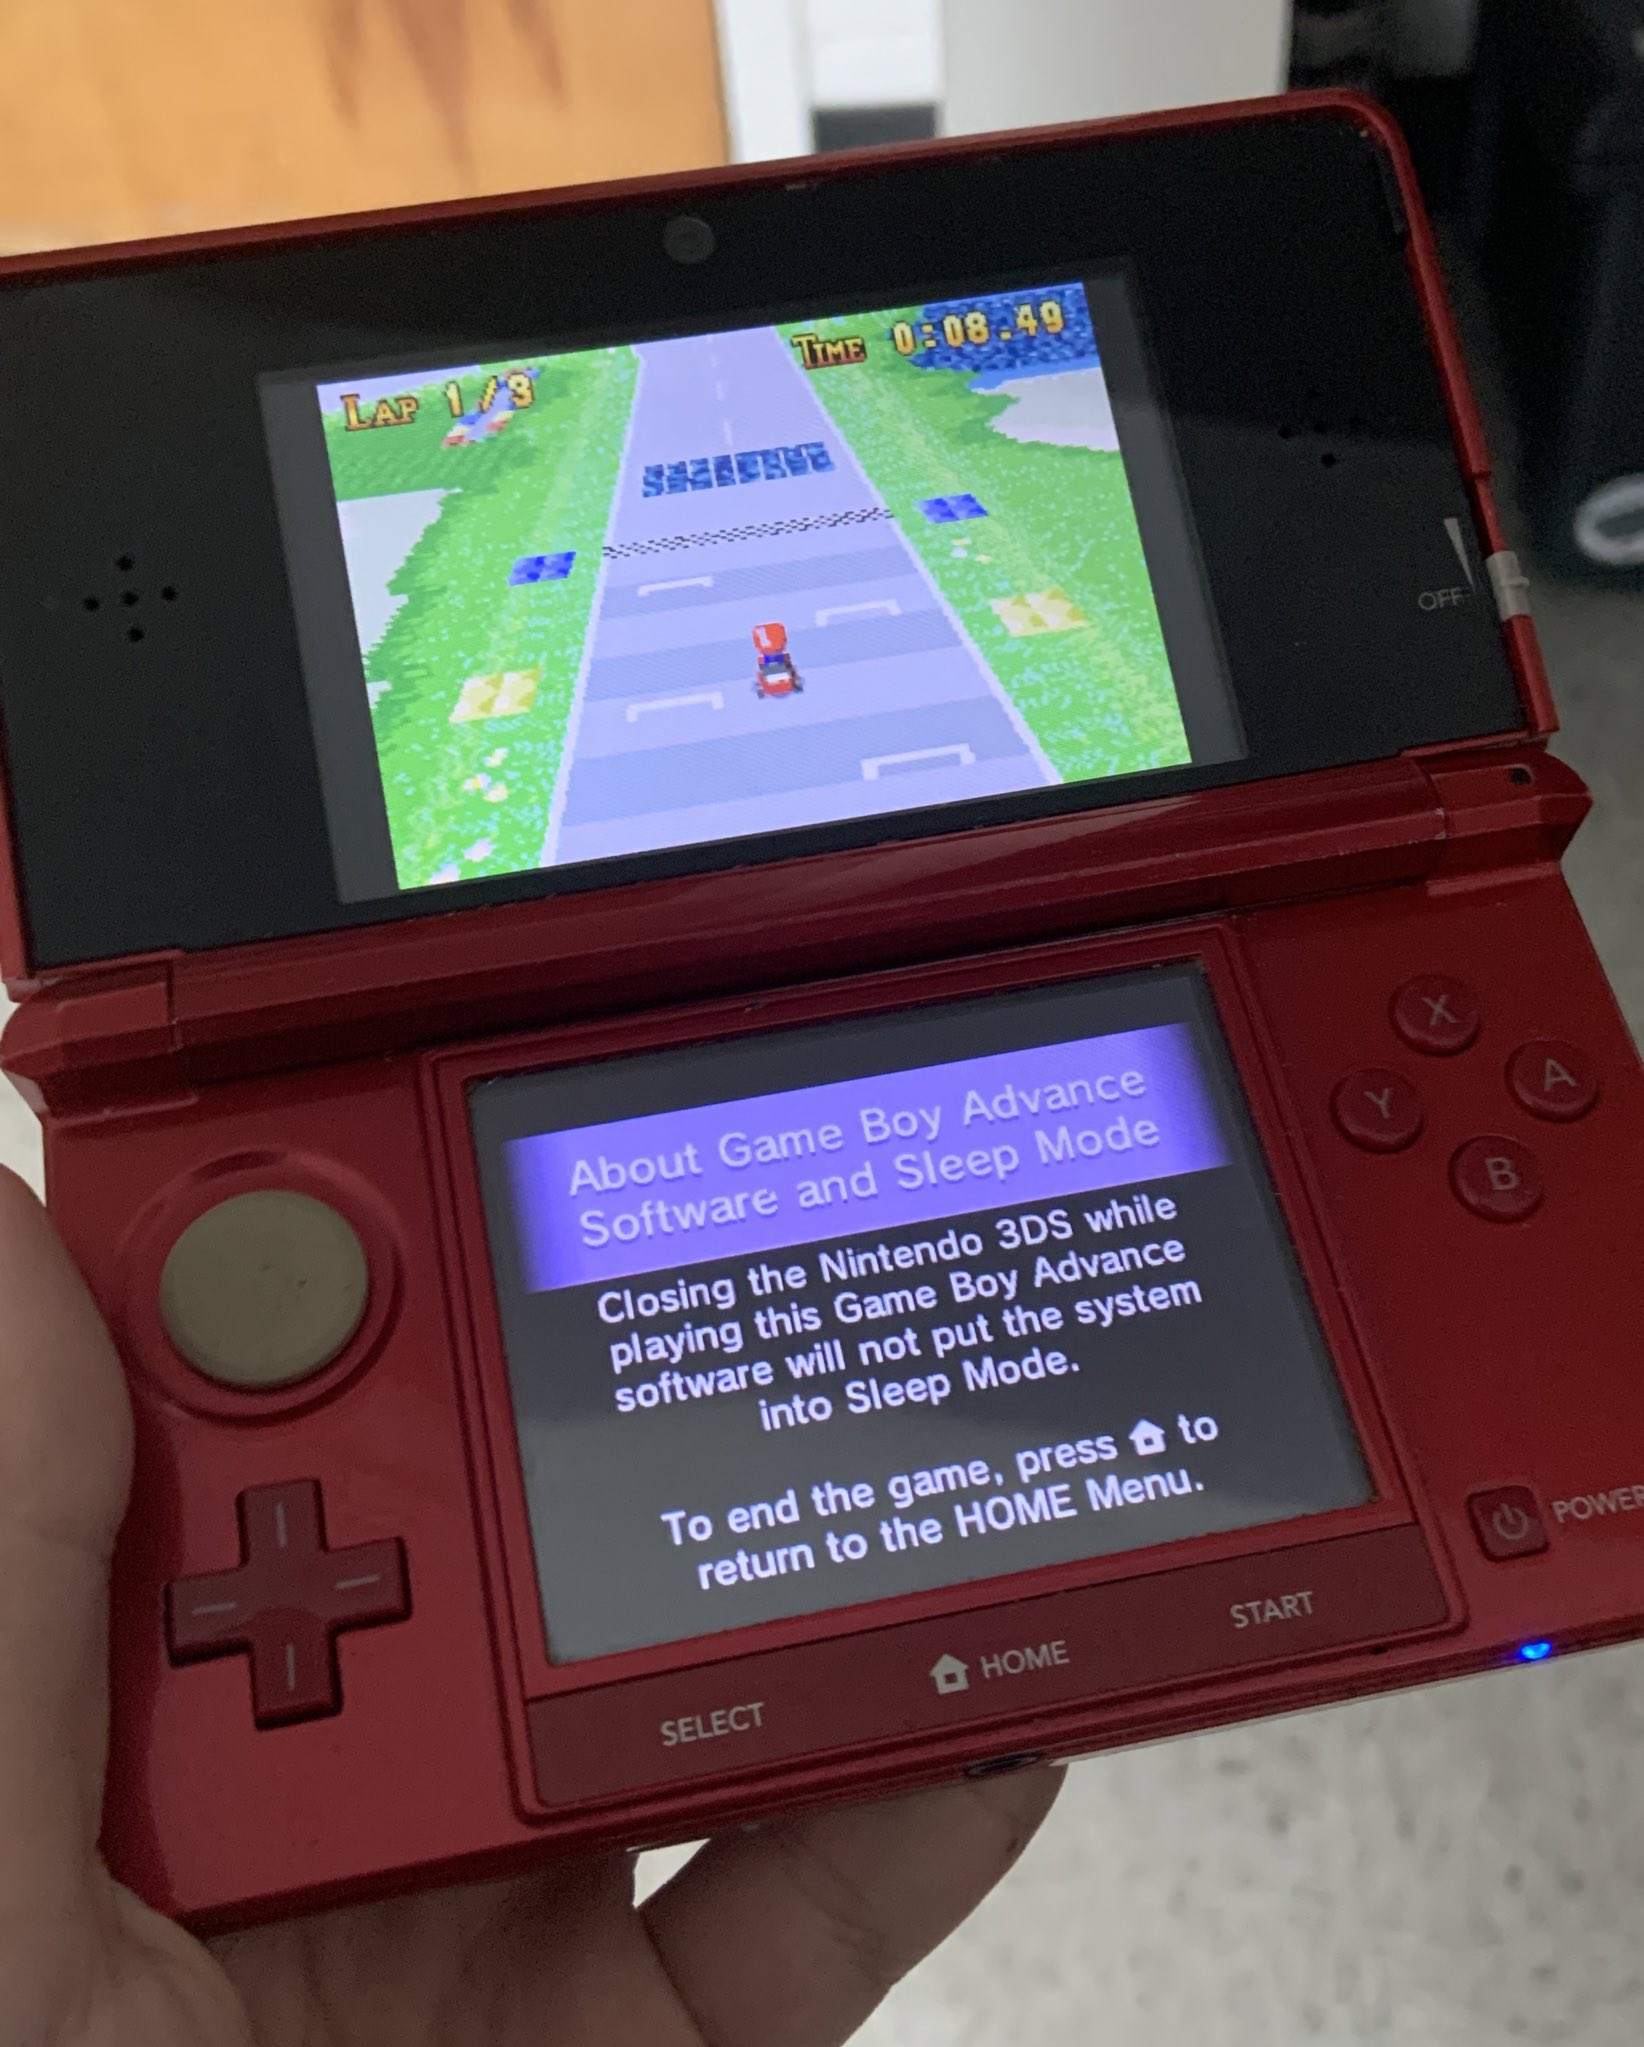 pude Bytte lure Reecee (Temporary Return) on Twitter: "You can play Mario Kart XXL on a  modded 3DS, here's the QR code https://t.co/QnxJEORKeK" / Twitter